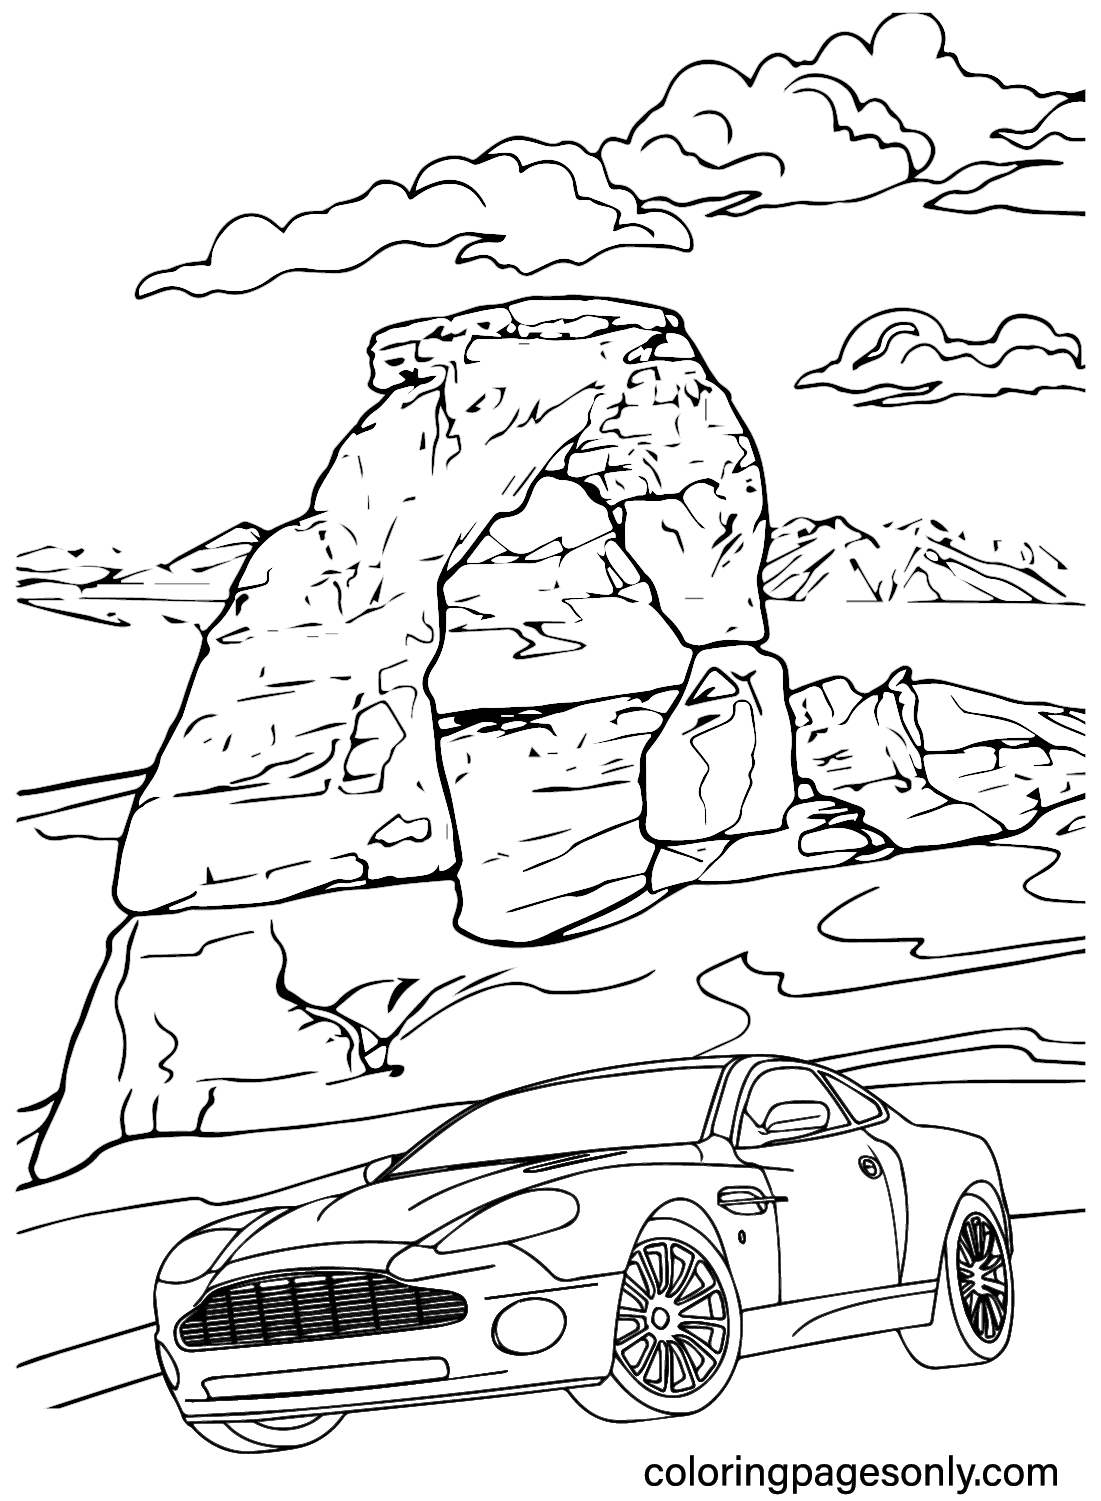 Aston Martin Coloring Pages to for Kids - Free Printable Coloring Pages